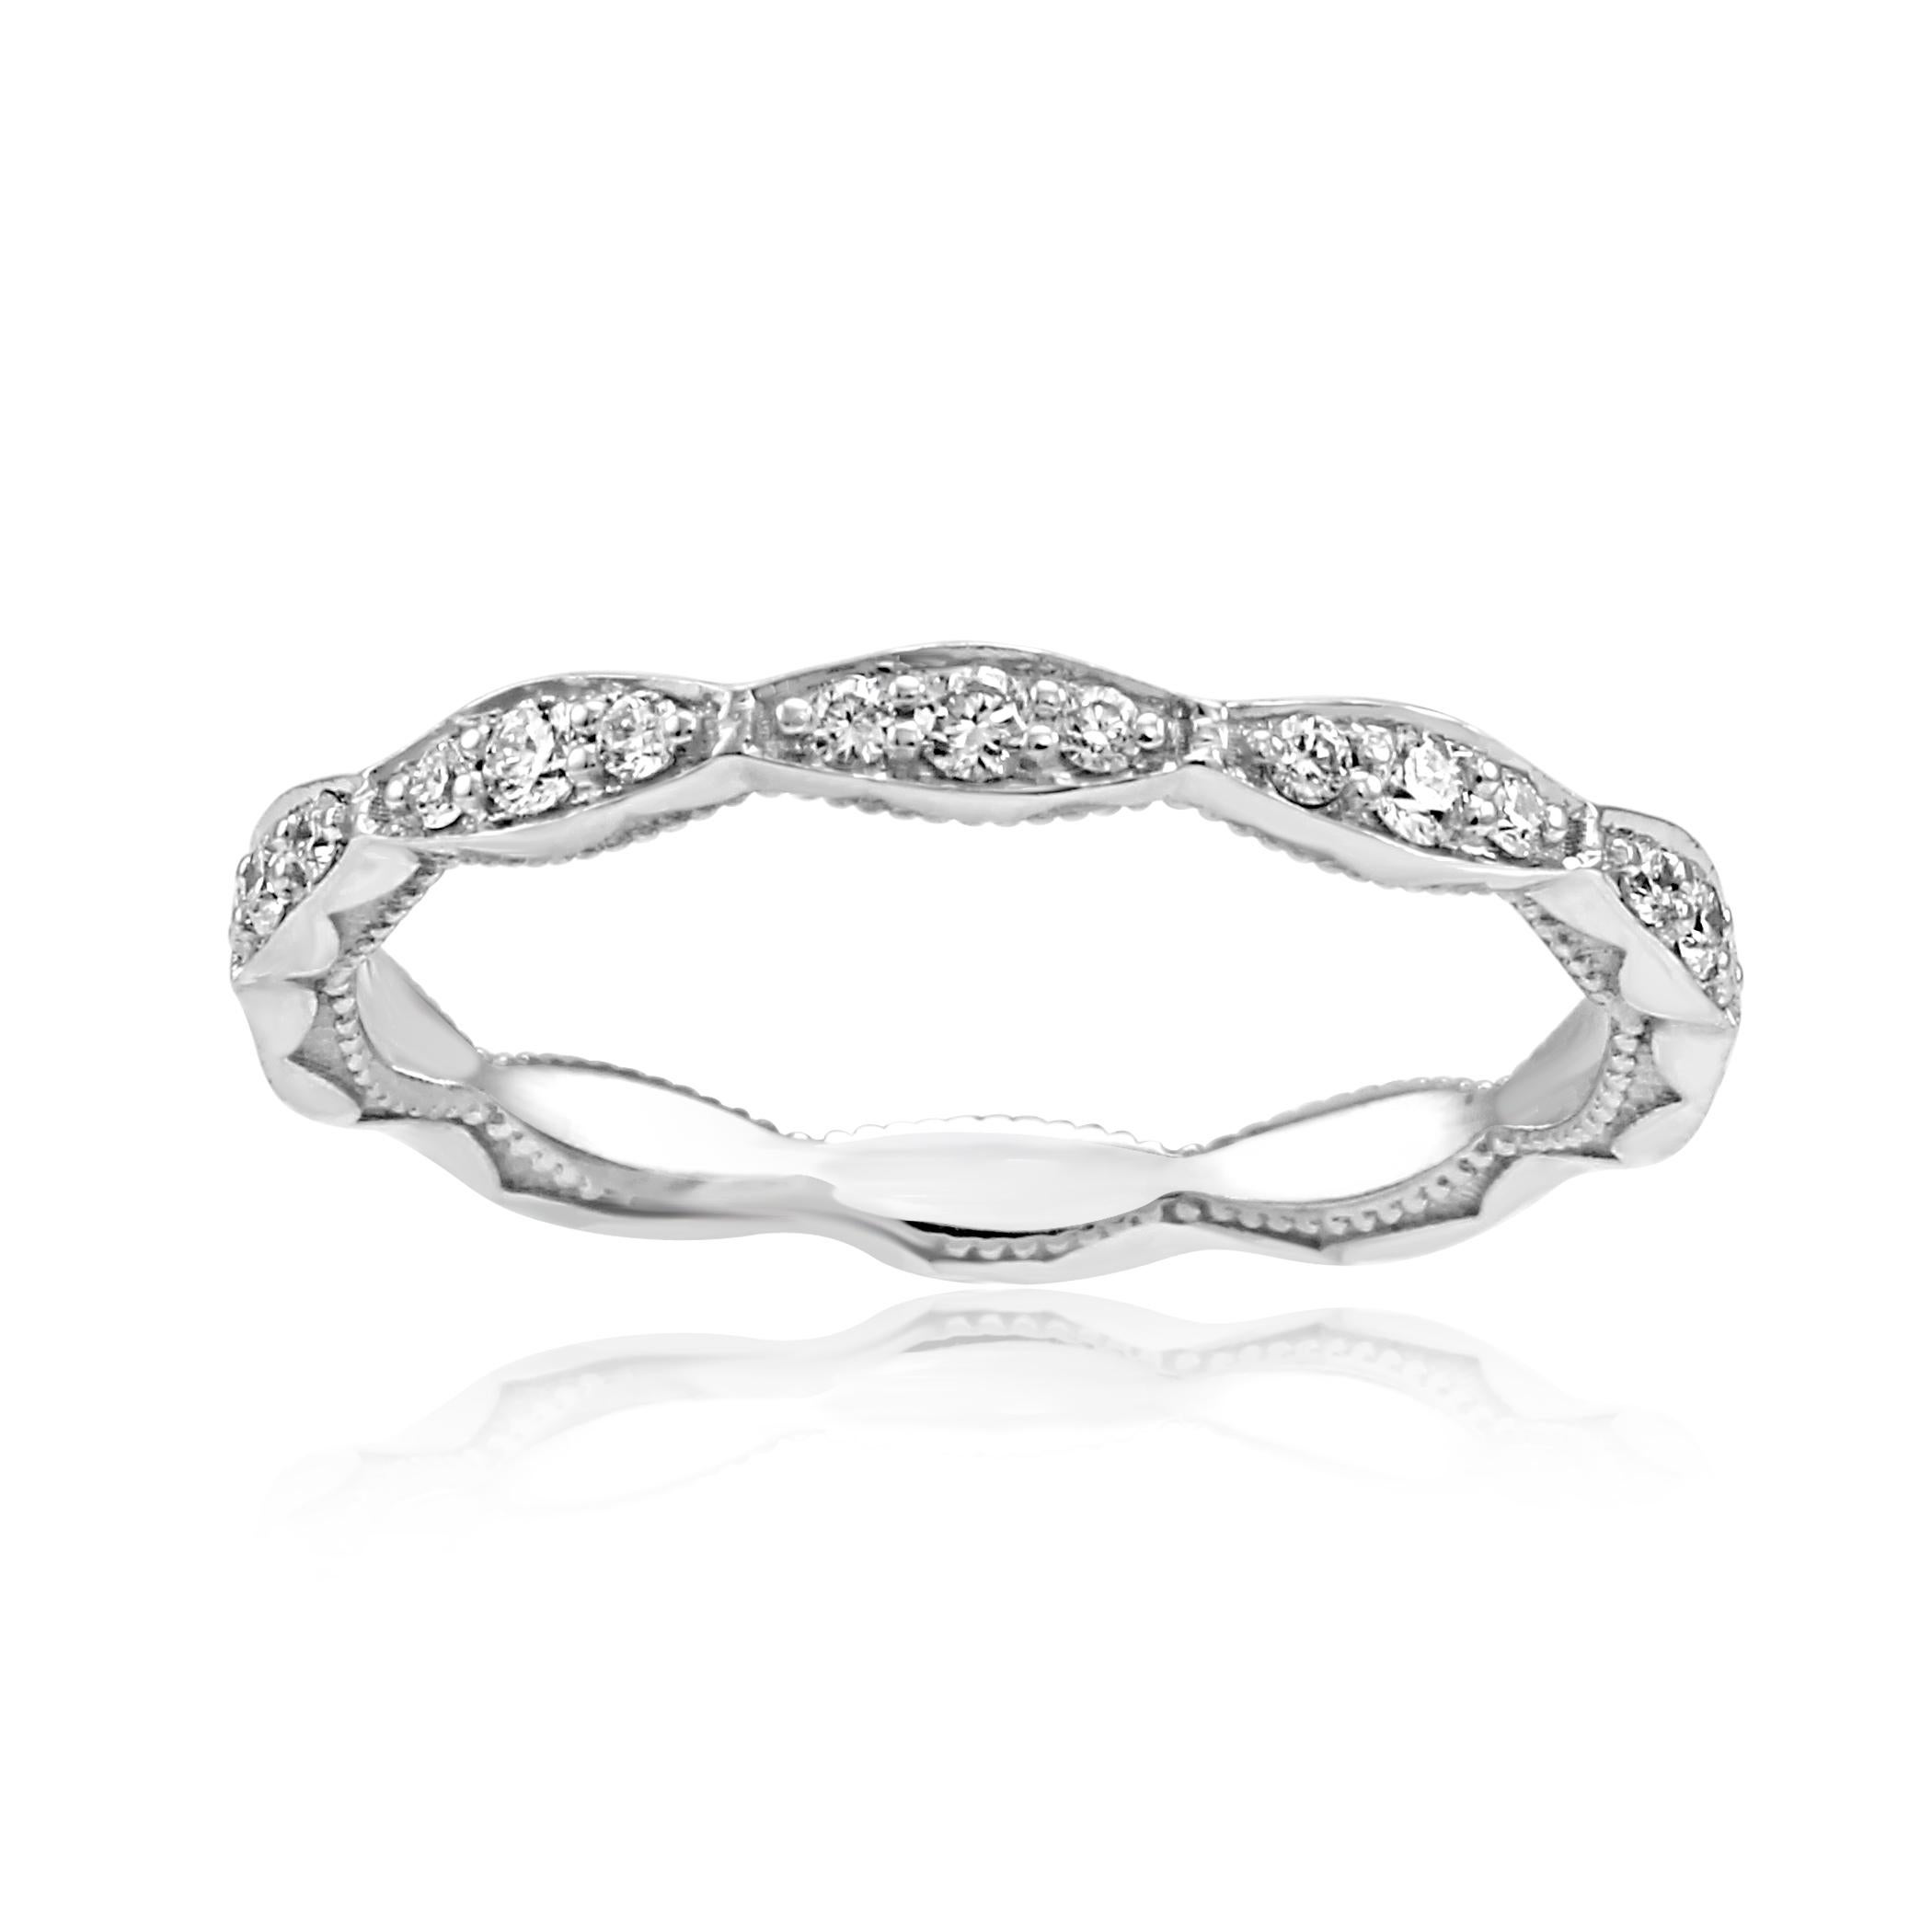 Stunning White G-H Color VS-SI Clarity Diamond Round 0.40 carat set in stunning 18K white Gold Engagement Fashion Band Ring with Filigree work.

Total Diamond Weight 0.40 Carat Approximateley